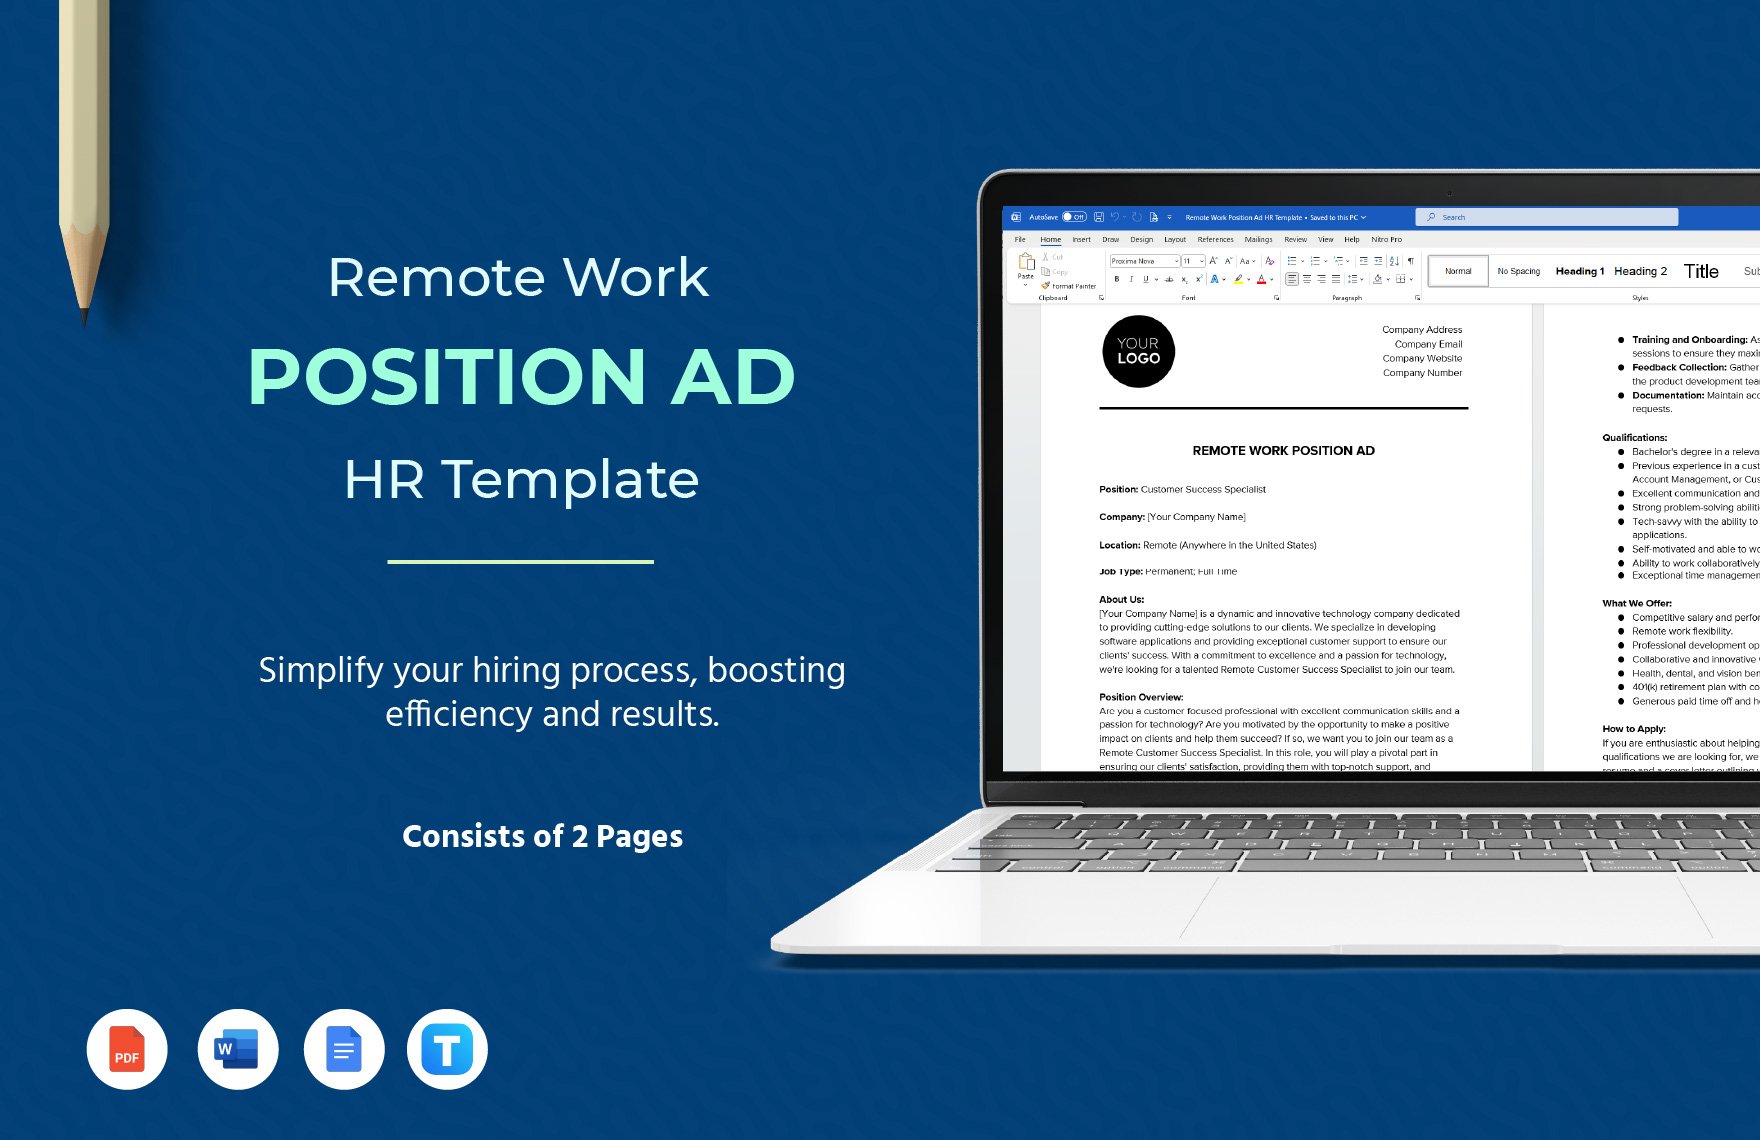 Remote Work Position Ad HR Template